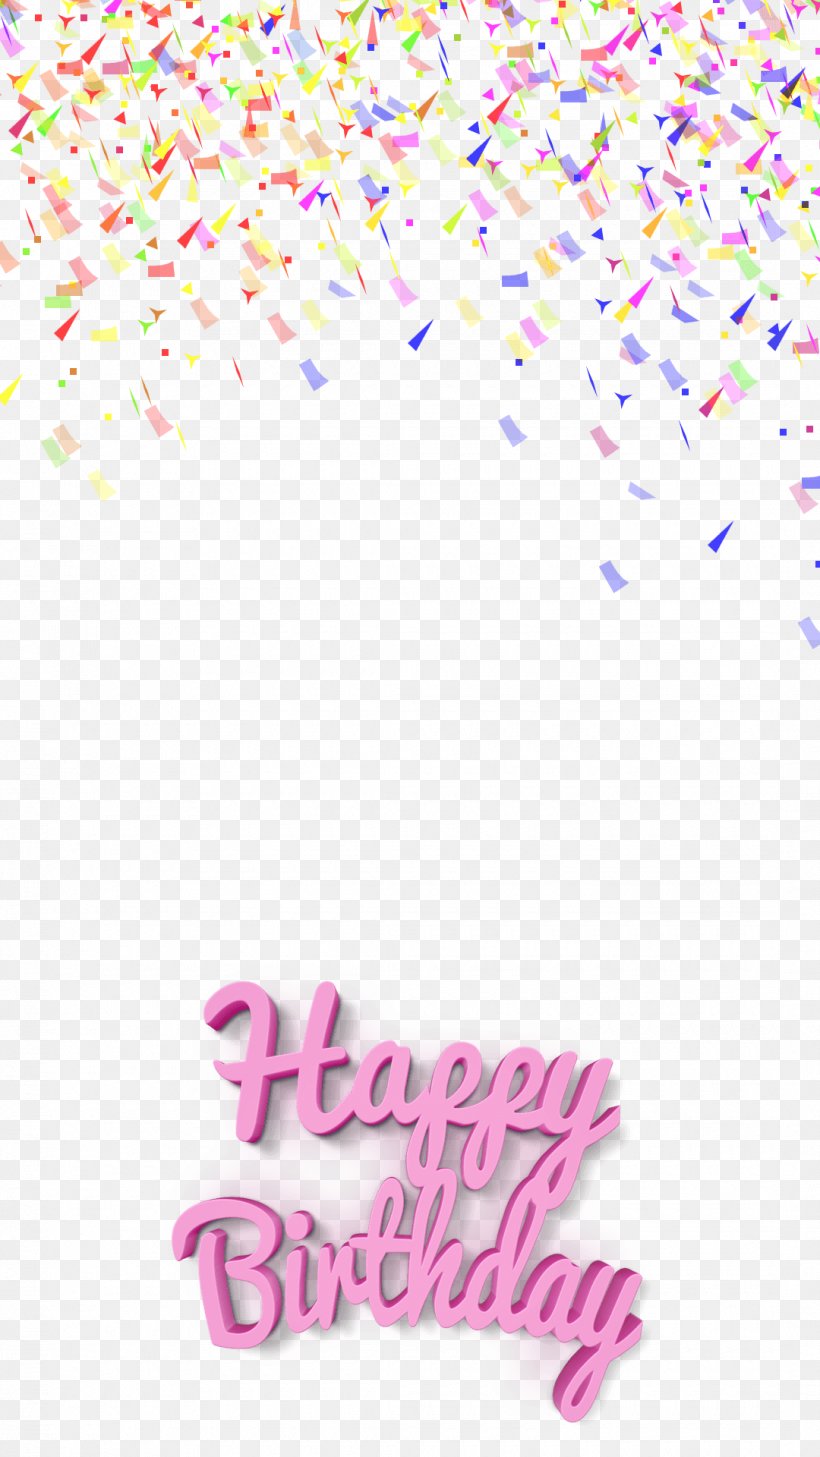 Birthday Confetti Bitstrips Clip Art, PNG, 1080x1920px, Birthday, Bitstrips, Bridal Shower, Confetti, Glitter Download Free